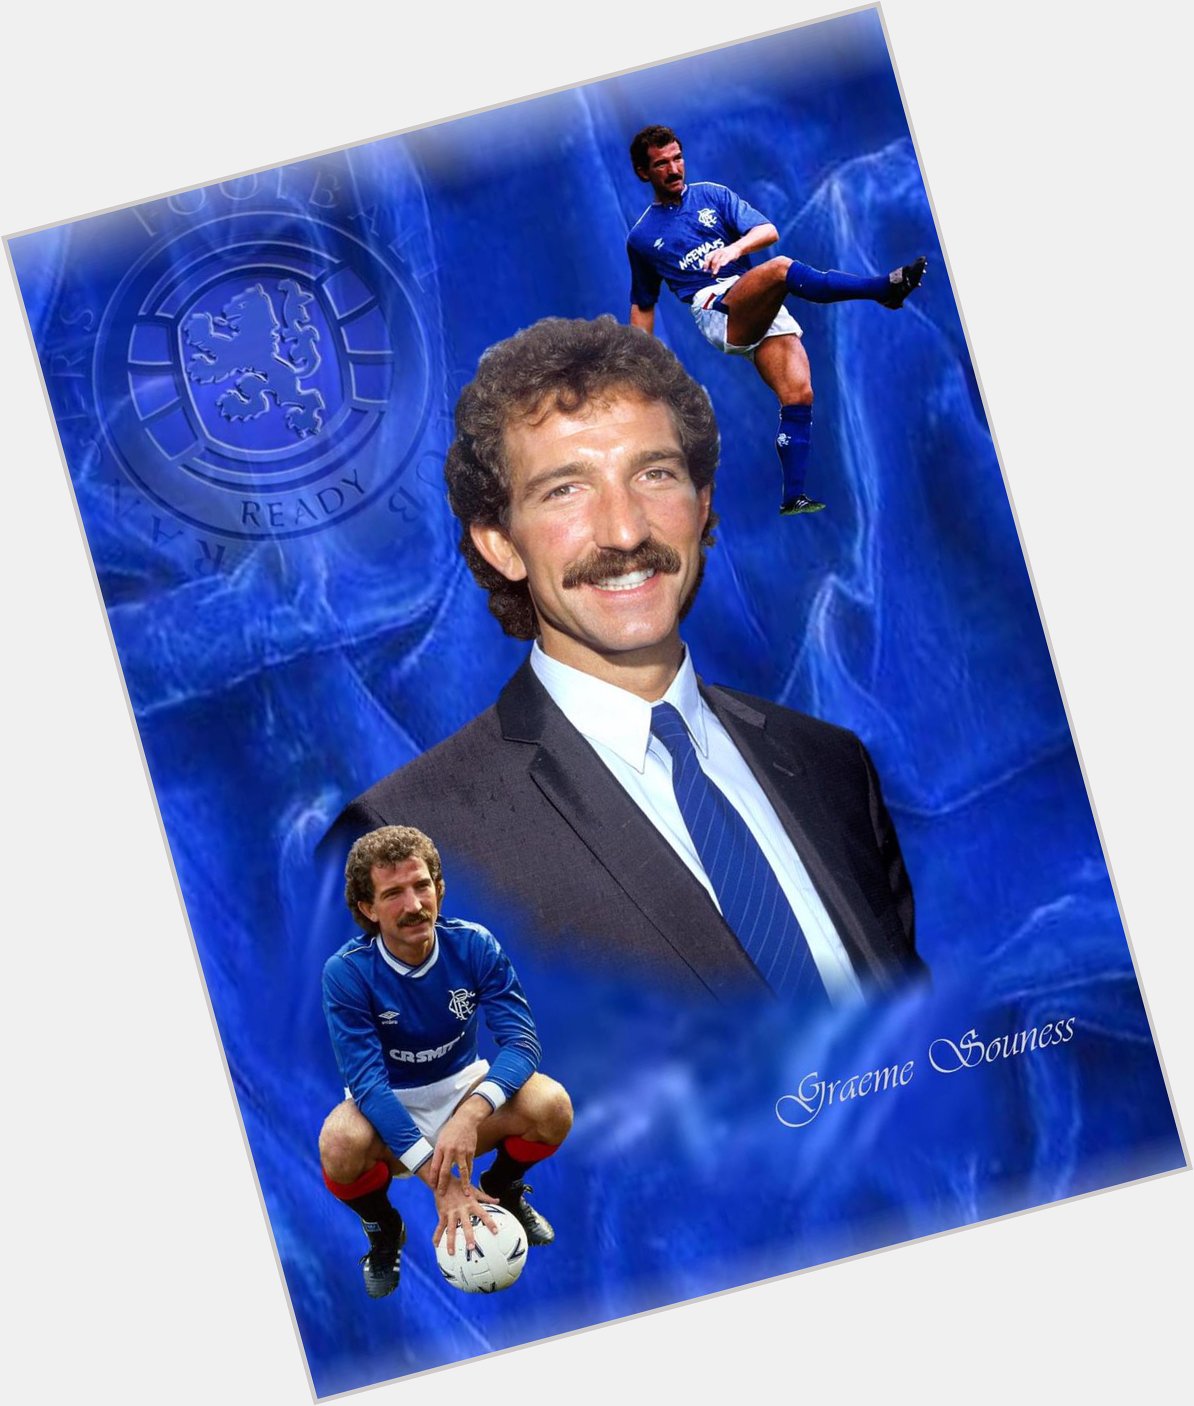 Happy birthday to Graham Souness
Boss and player of the famous Glasgow Rangers        